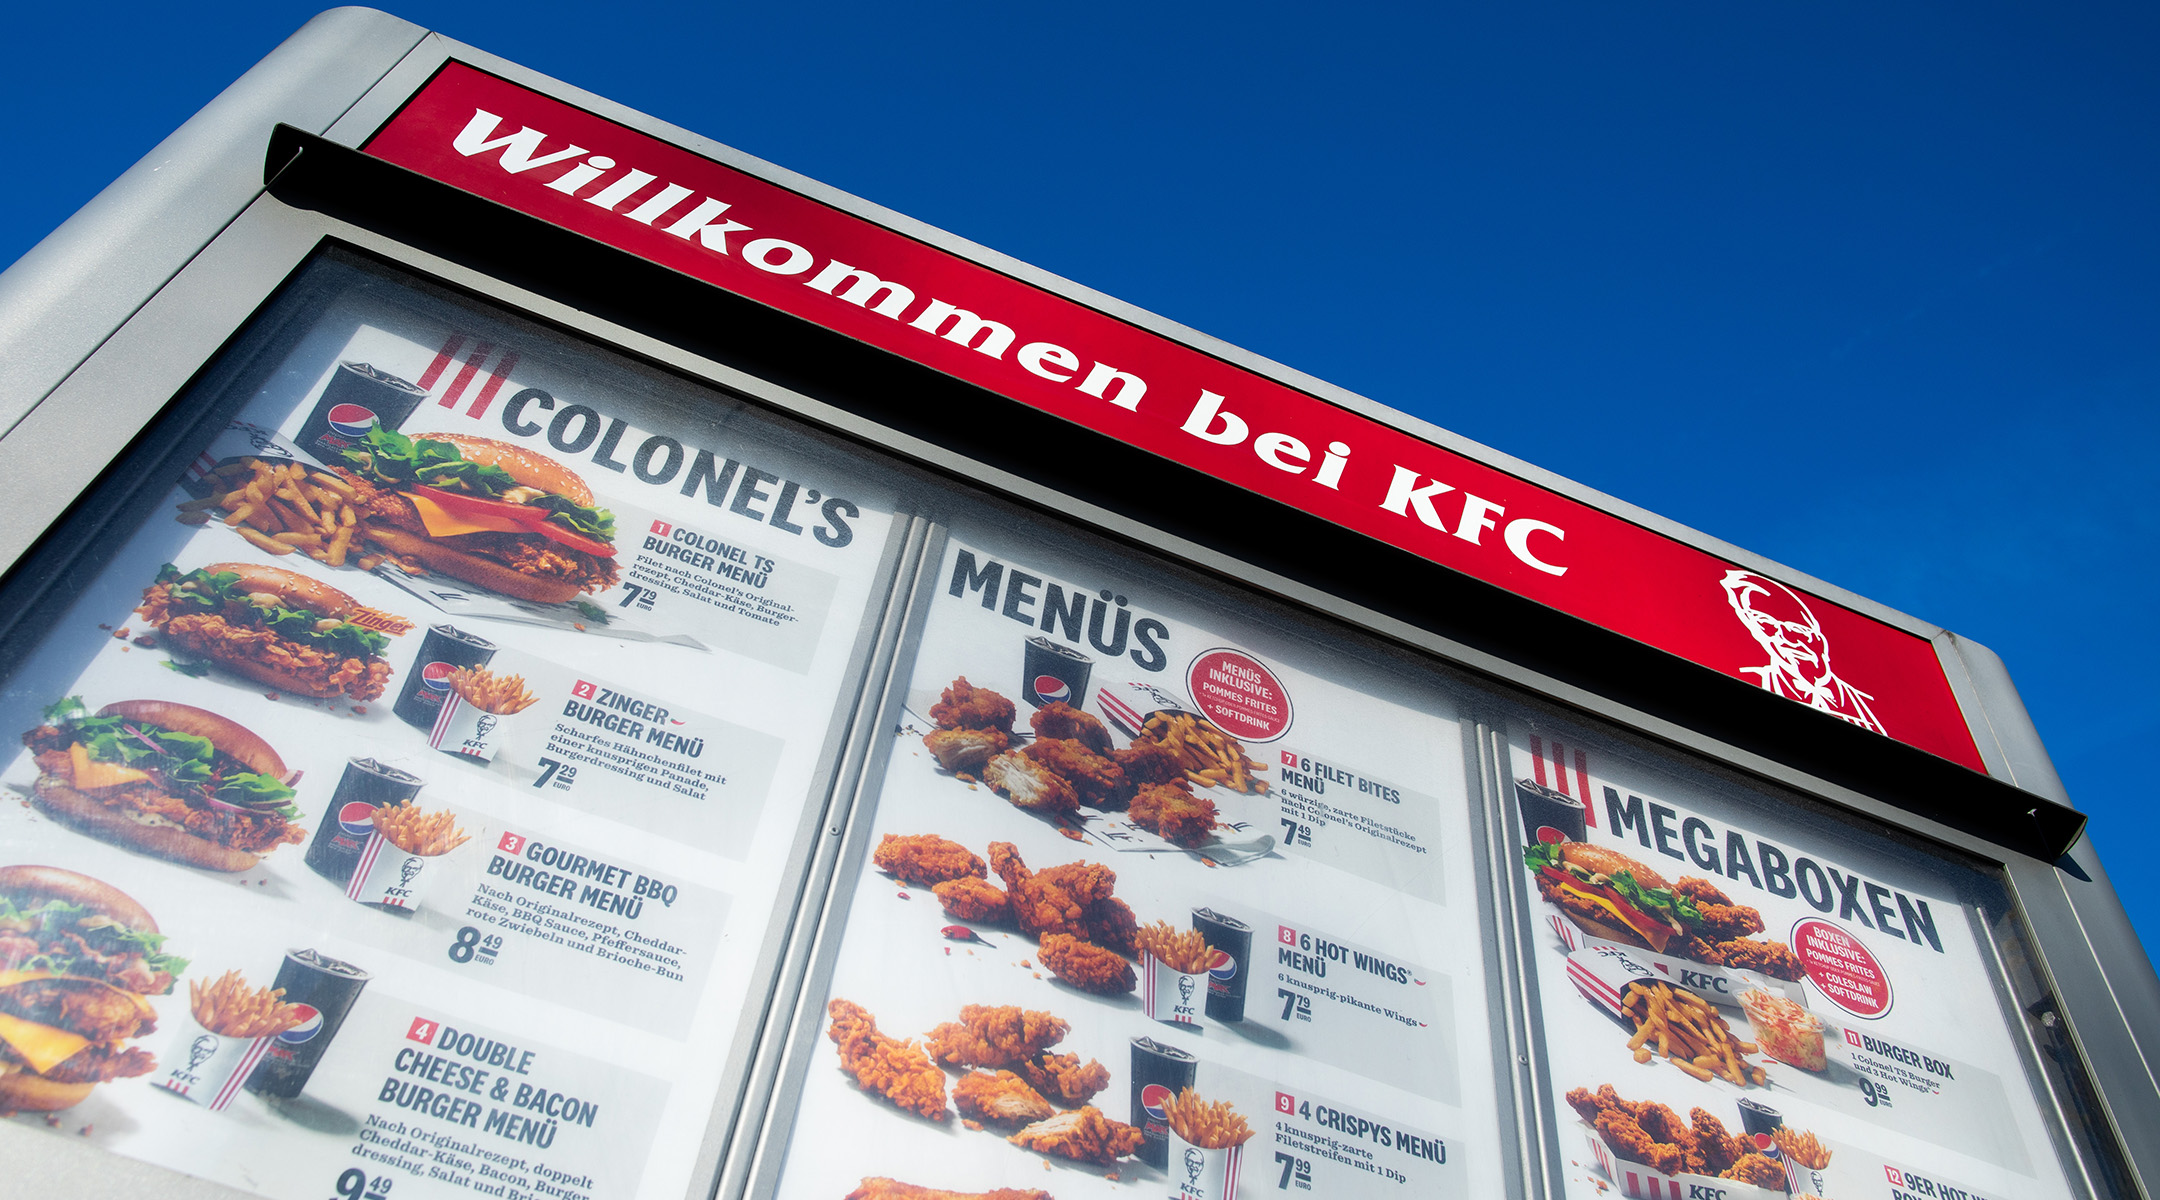 “Welcome to KFC” is written above a drive-in menu at the fast food chain Kentucky Fried Chicken (KFC) in Duesseldorf, Nov. 18, 2020. (Rolf Vennenbernd/picture alliance via Getty Images)